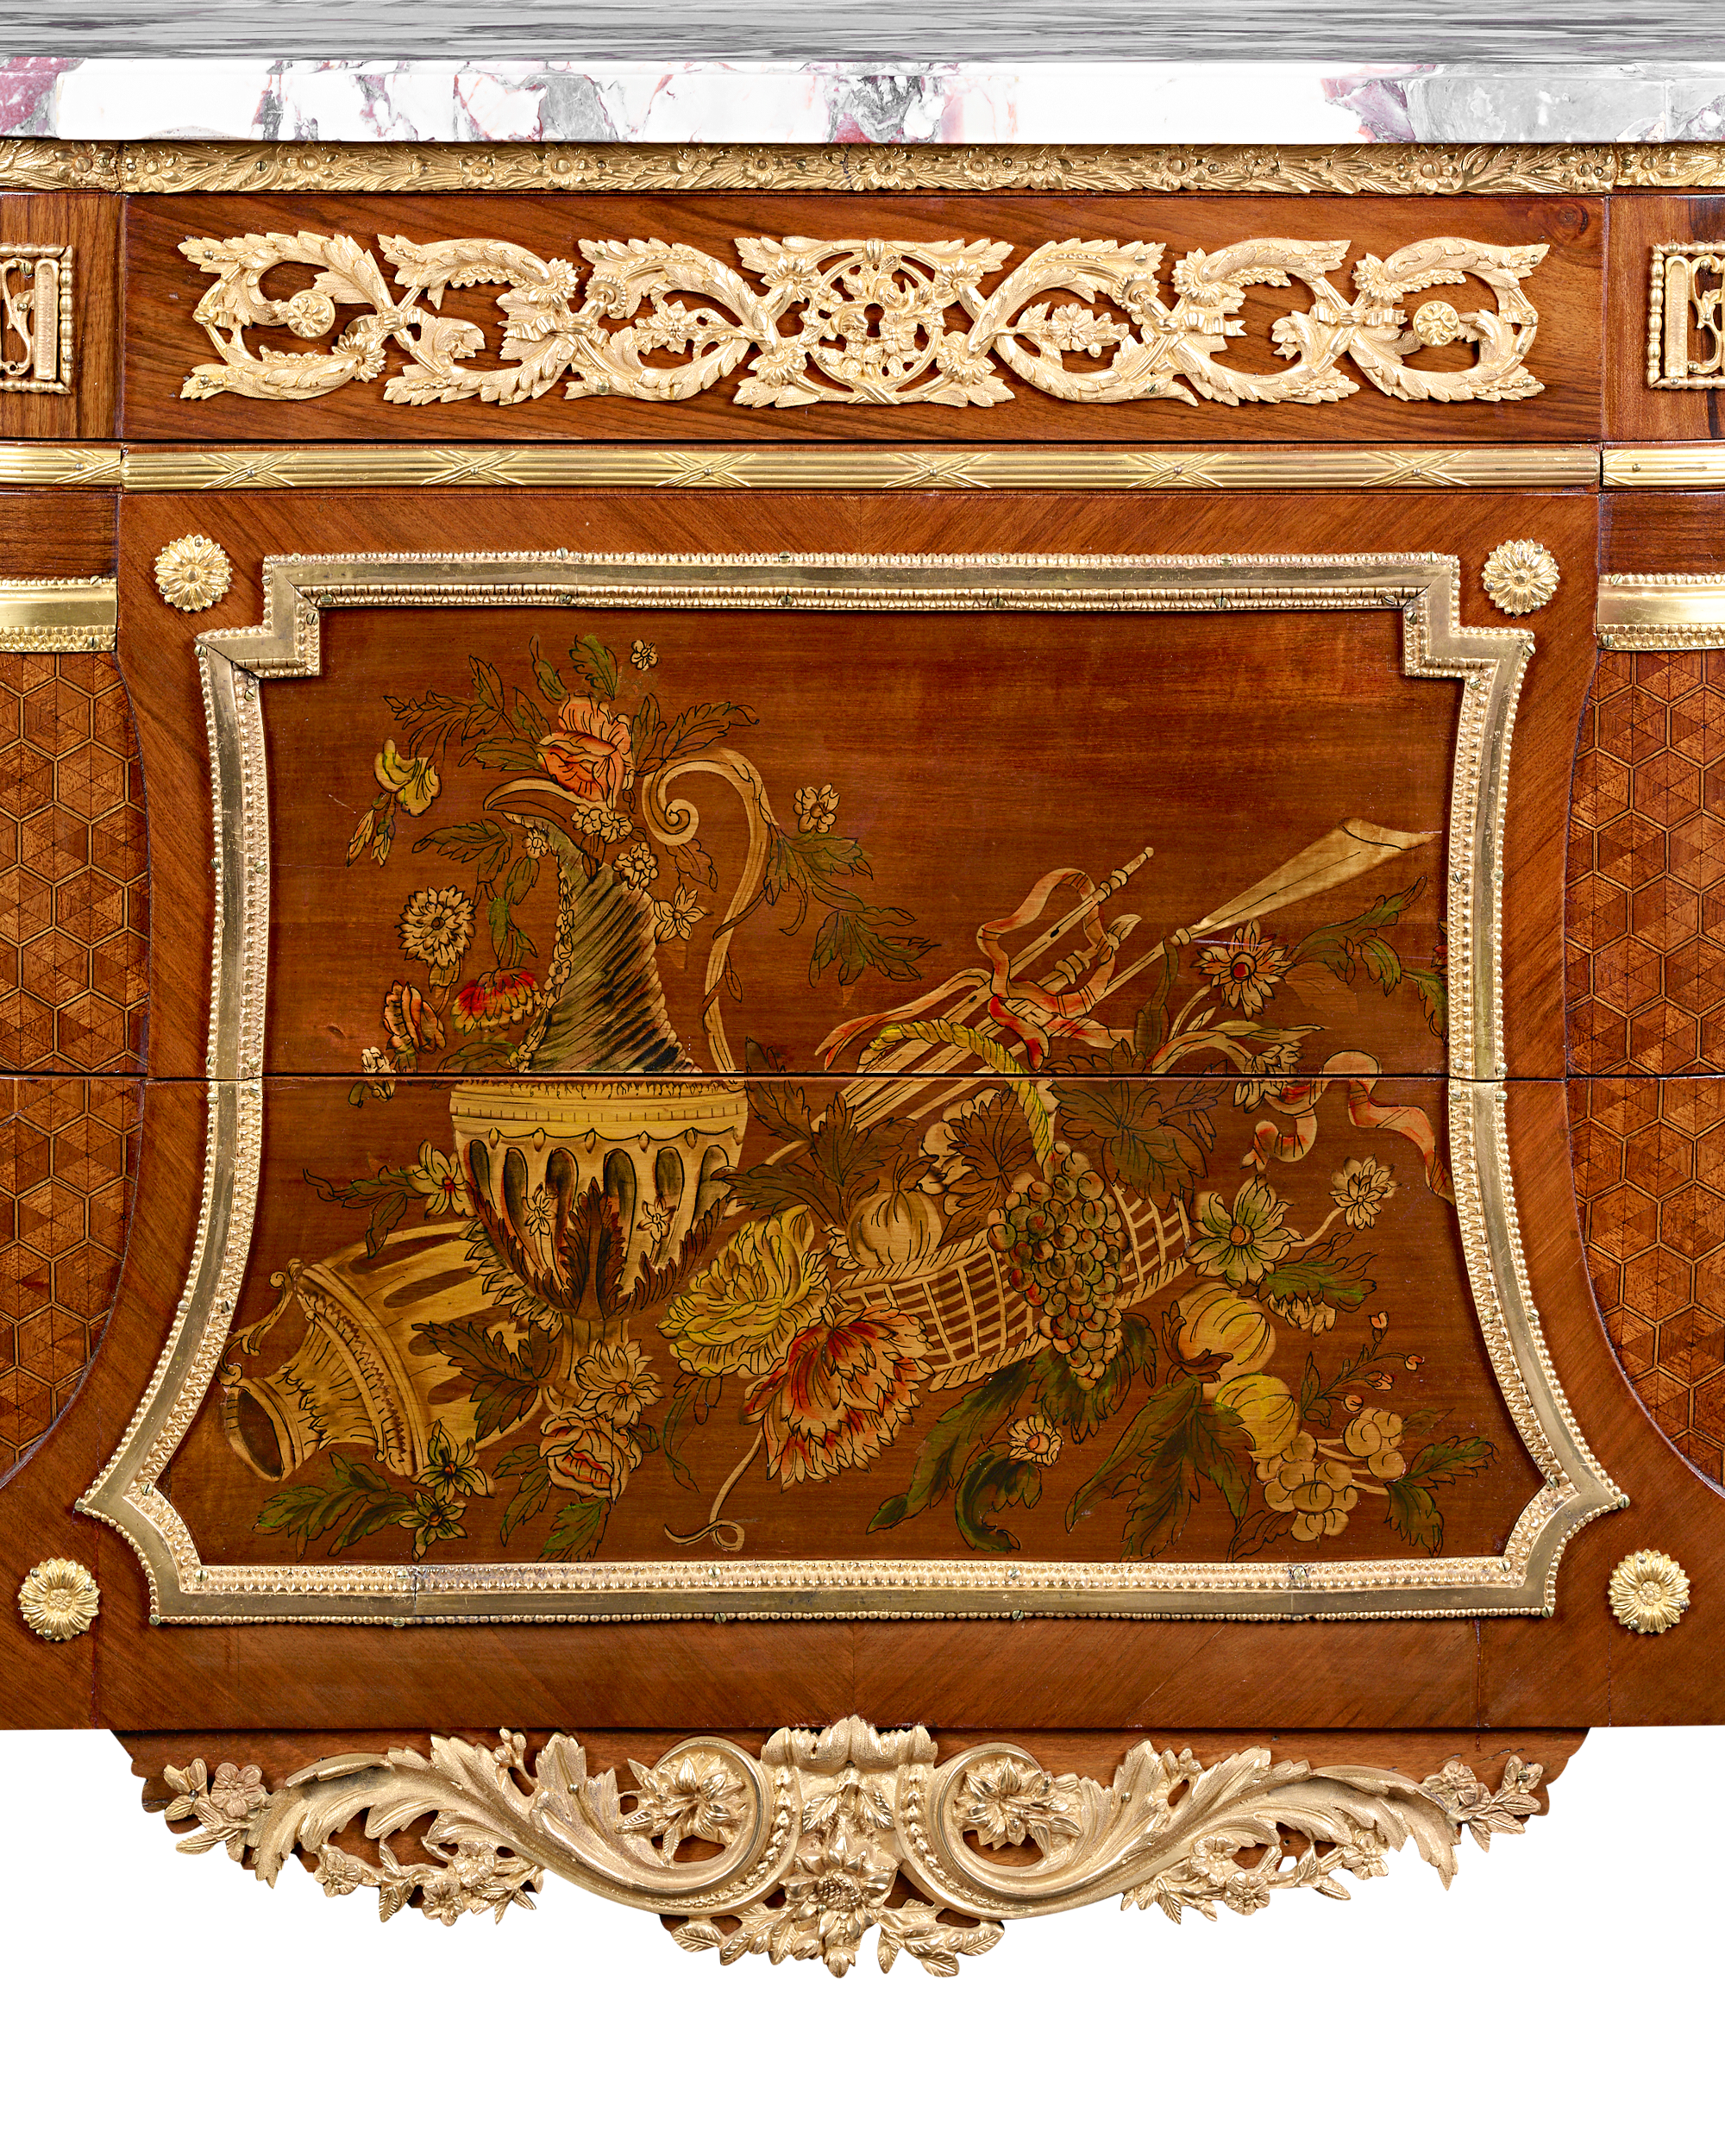 Louis XVI-Style Marquetry Commodes